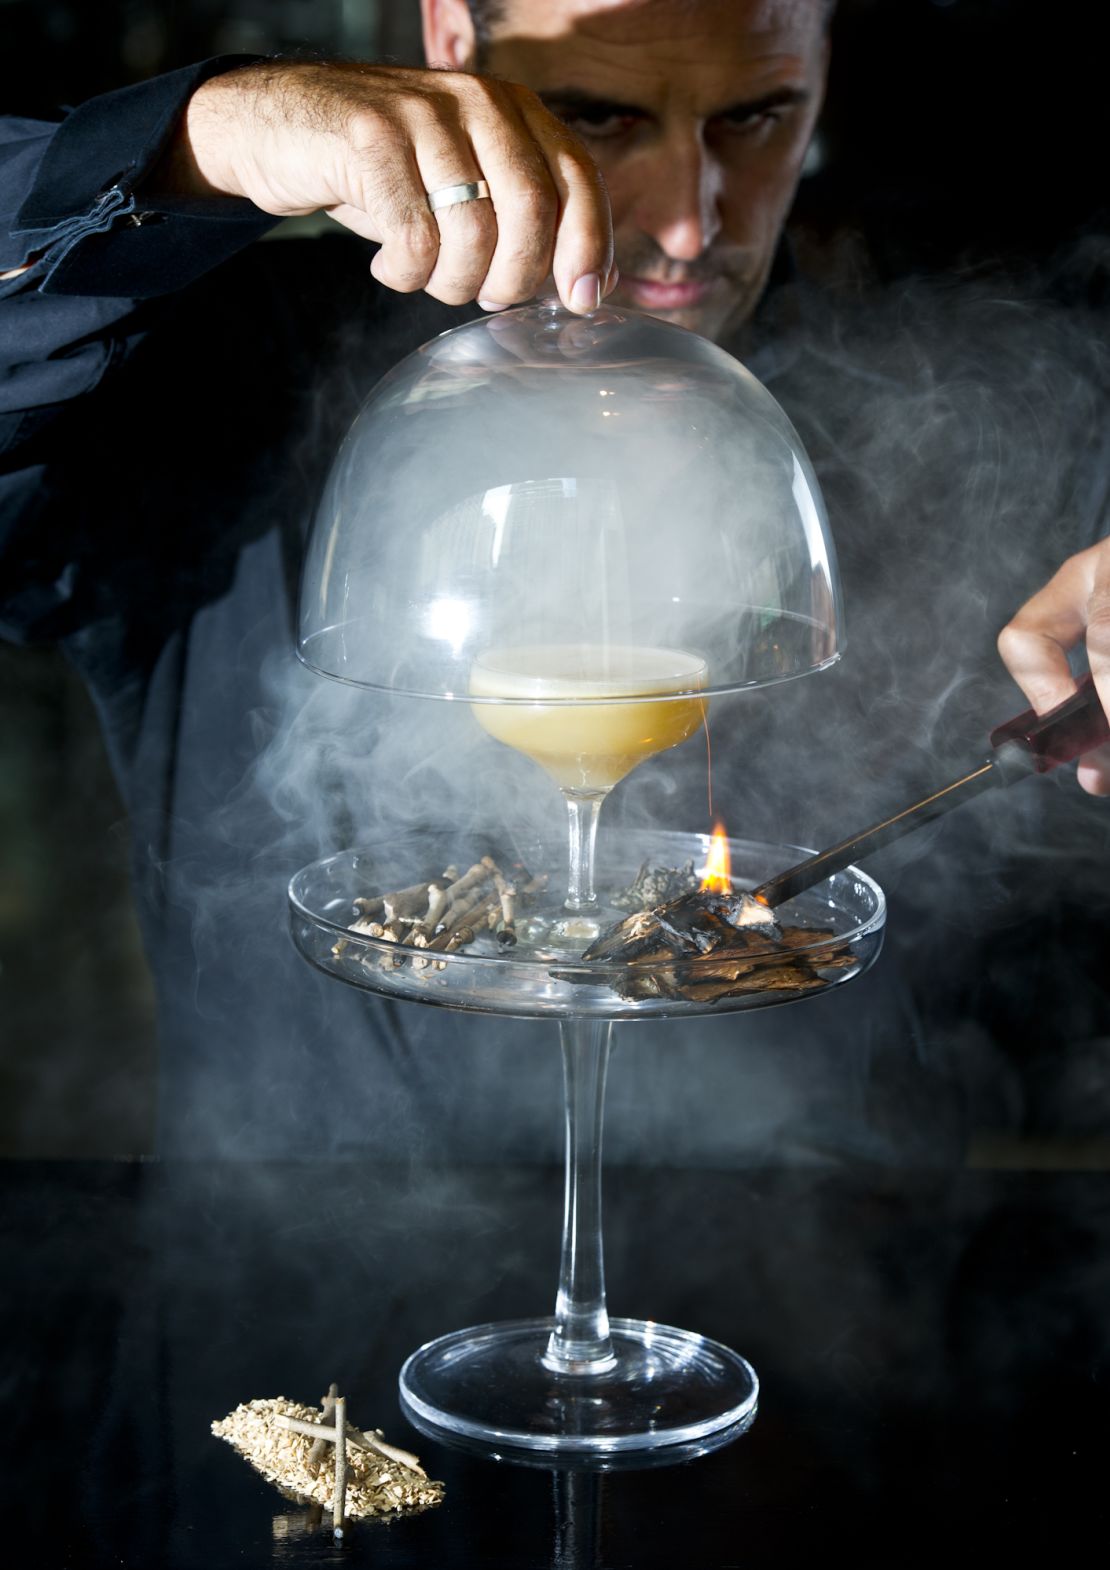 Gin is infused with with "gunpowder flavors" and shaken with fernet branca and egg white.